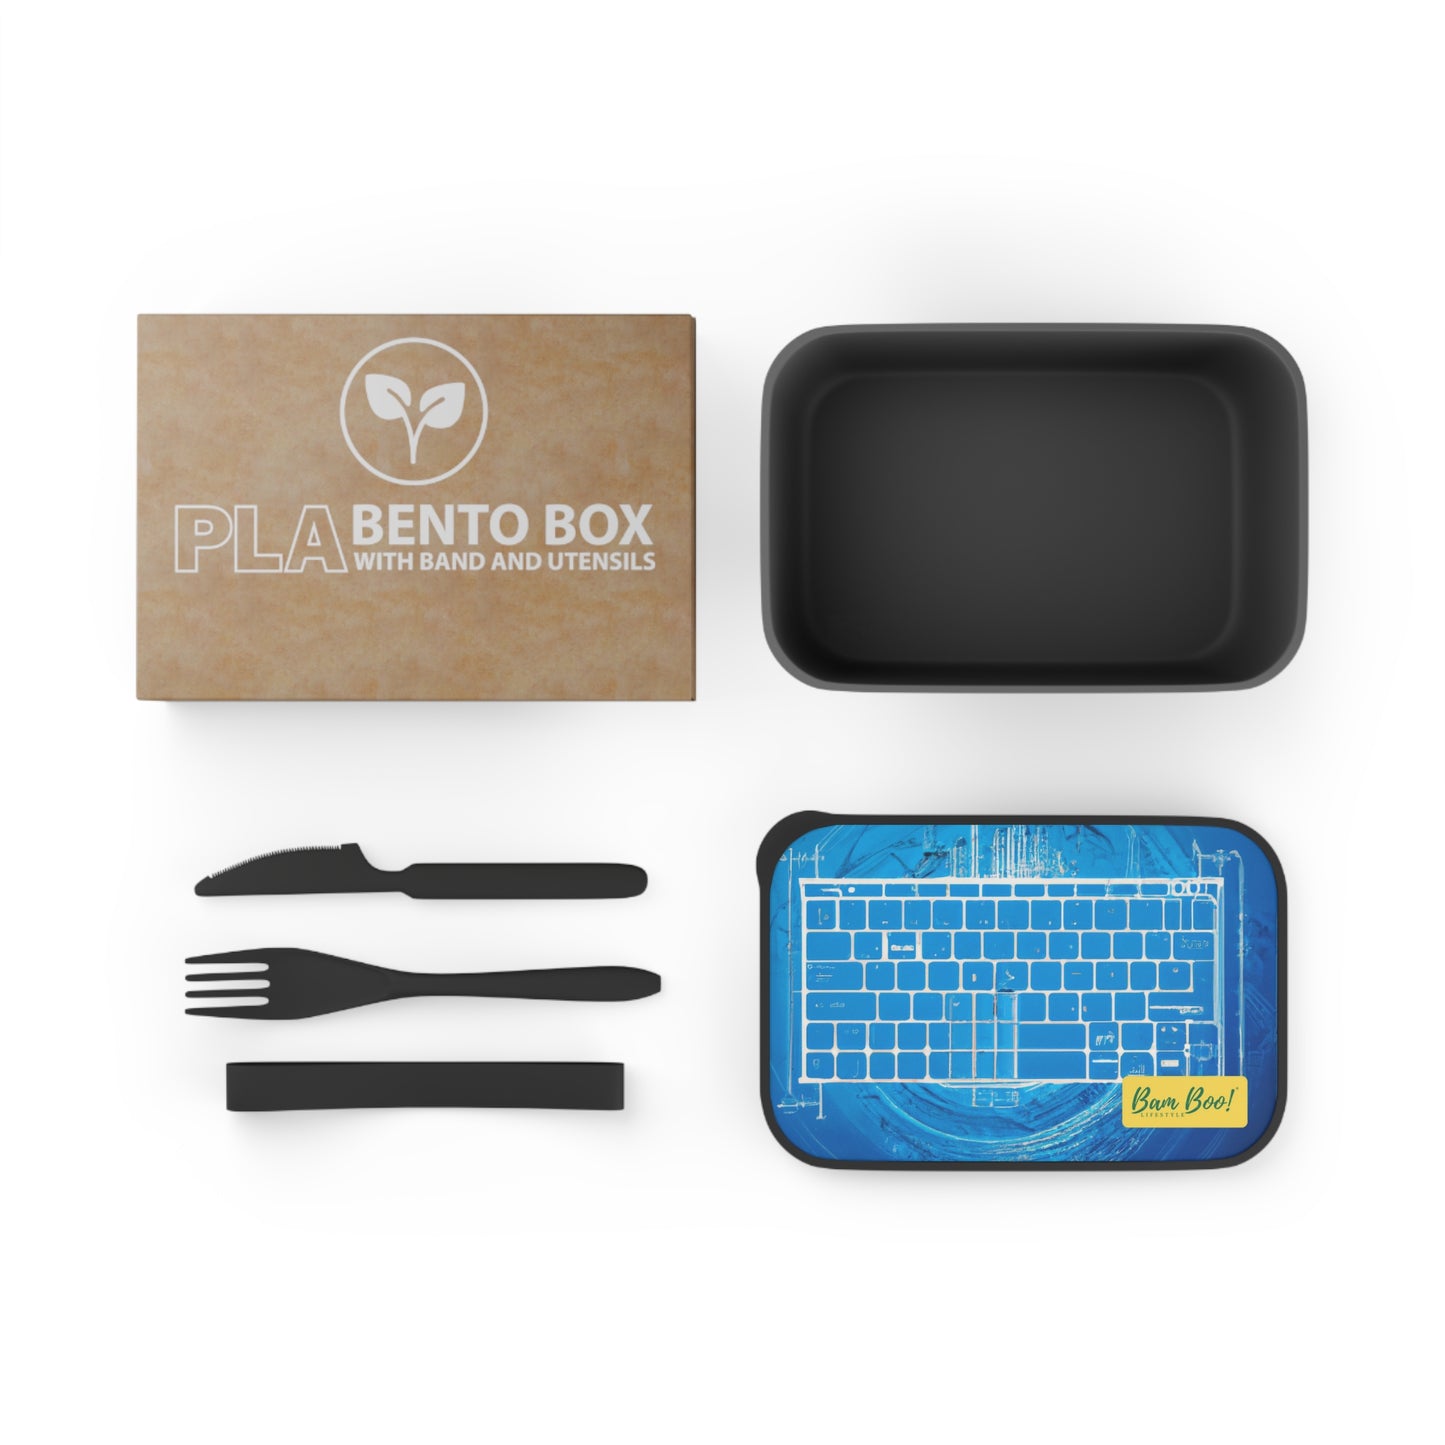 "Nature-Tech Art Fusion" - Bam Boo! Lifestyle Eco-friendly PLA Bento Box with Band and Utensils